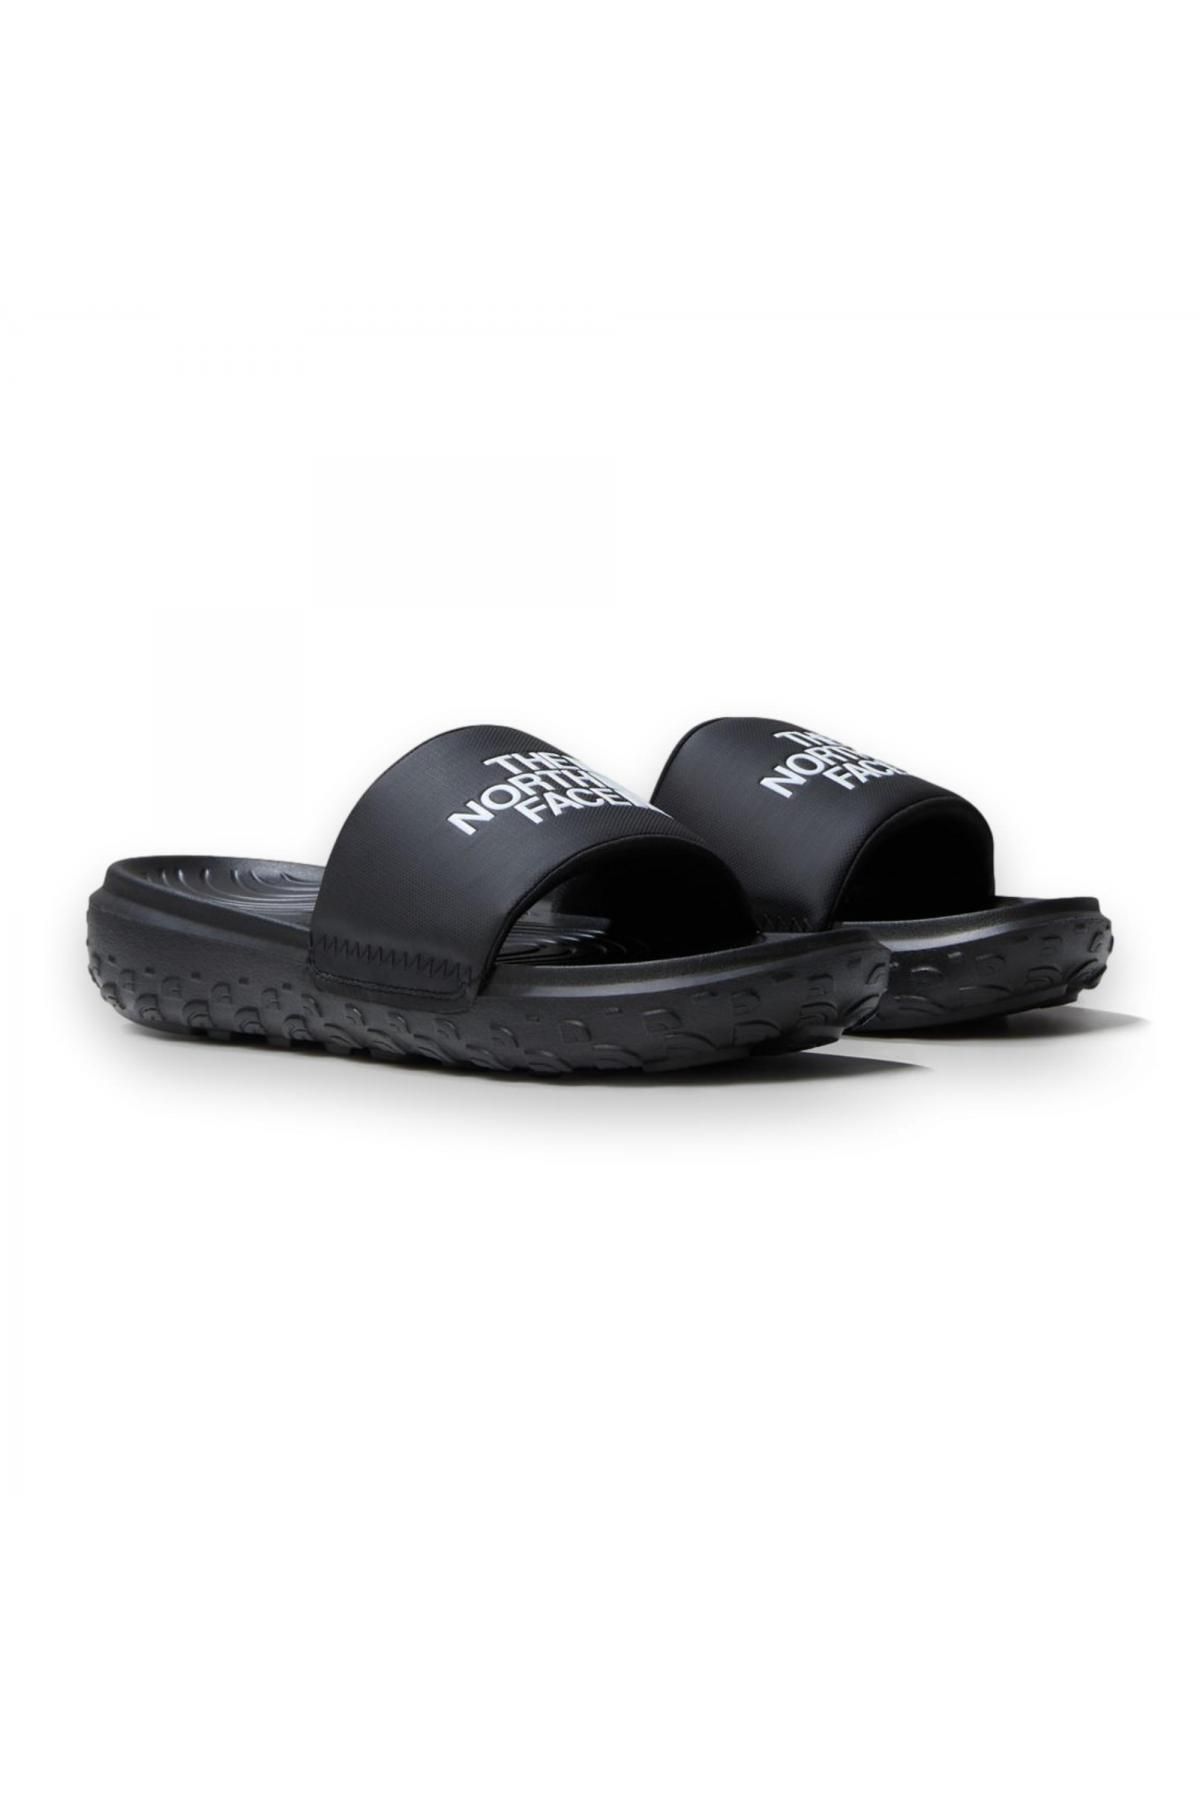 The North Face Nf0A8A90 Never Stop Cush Slide Siyah Unisex Terlik